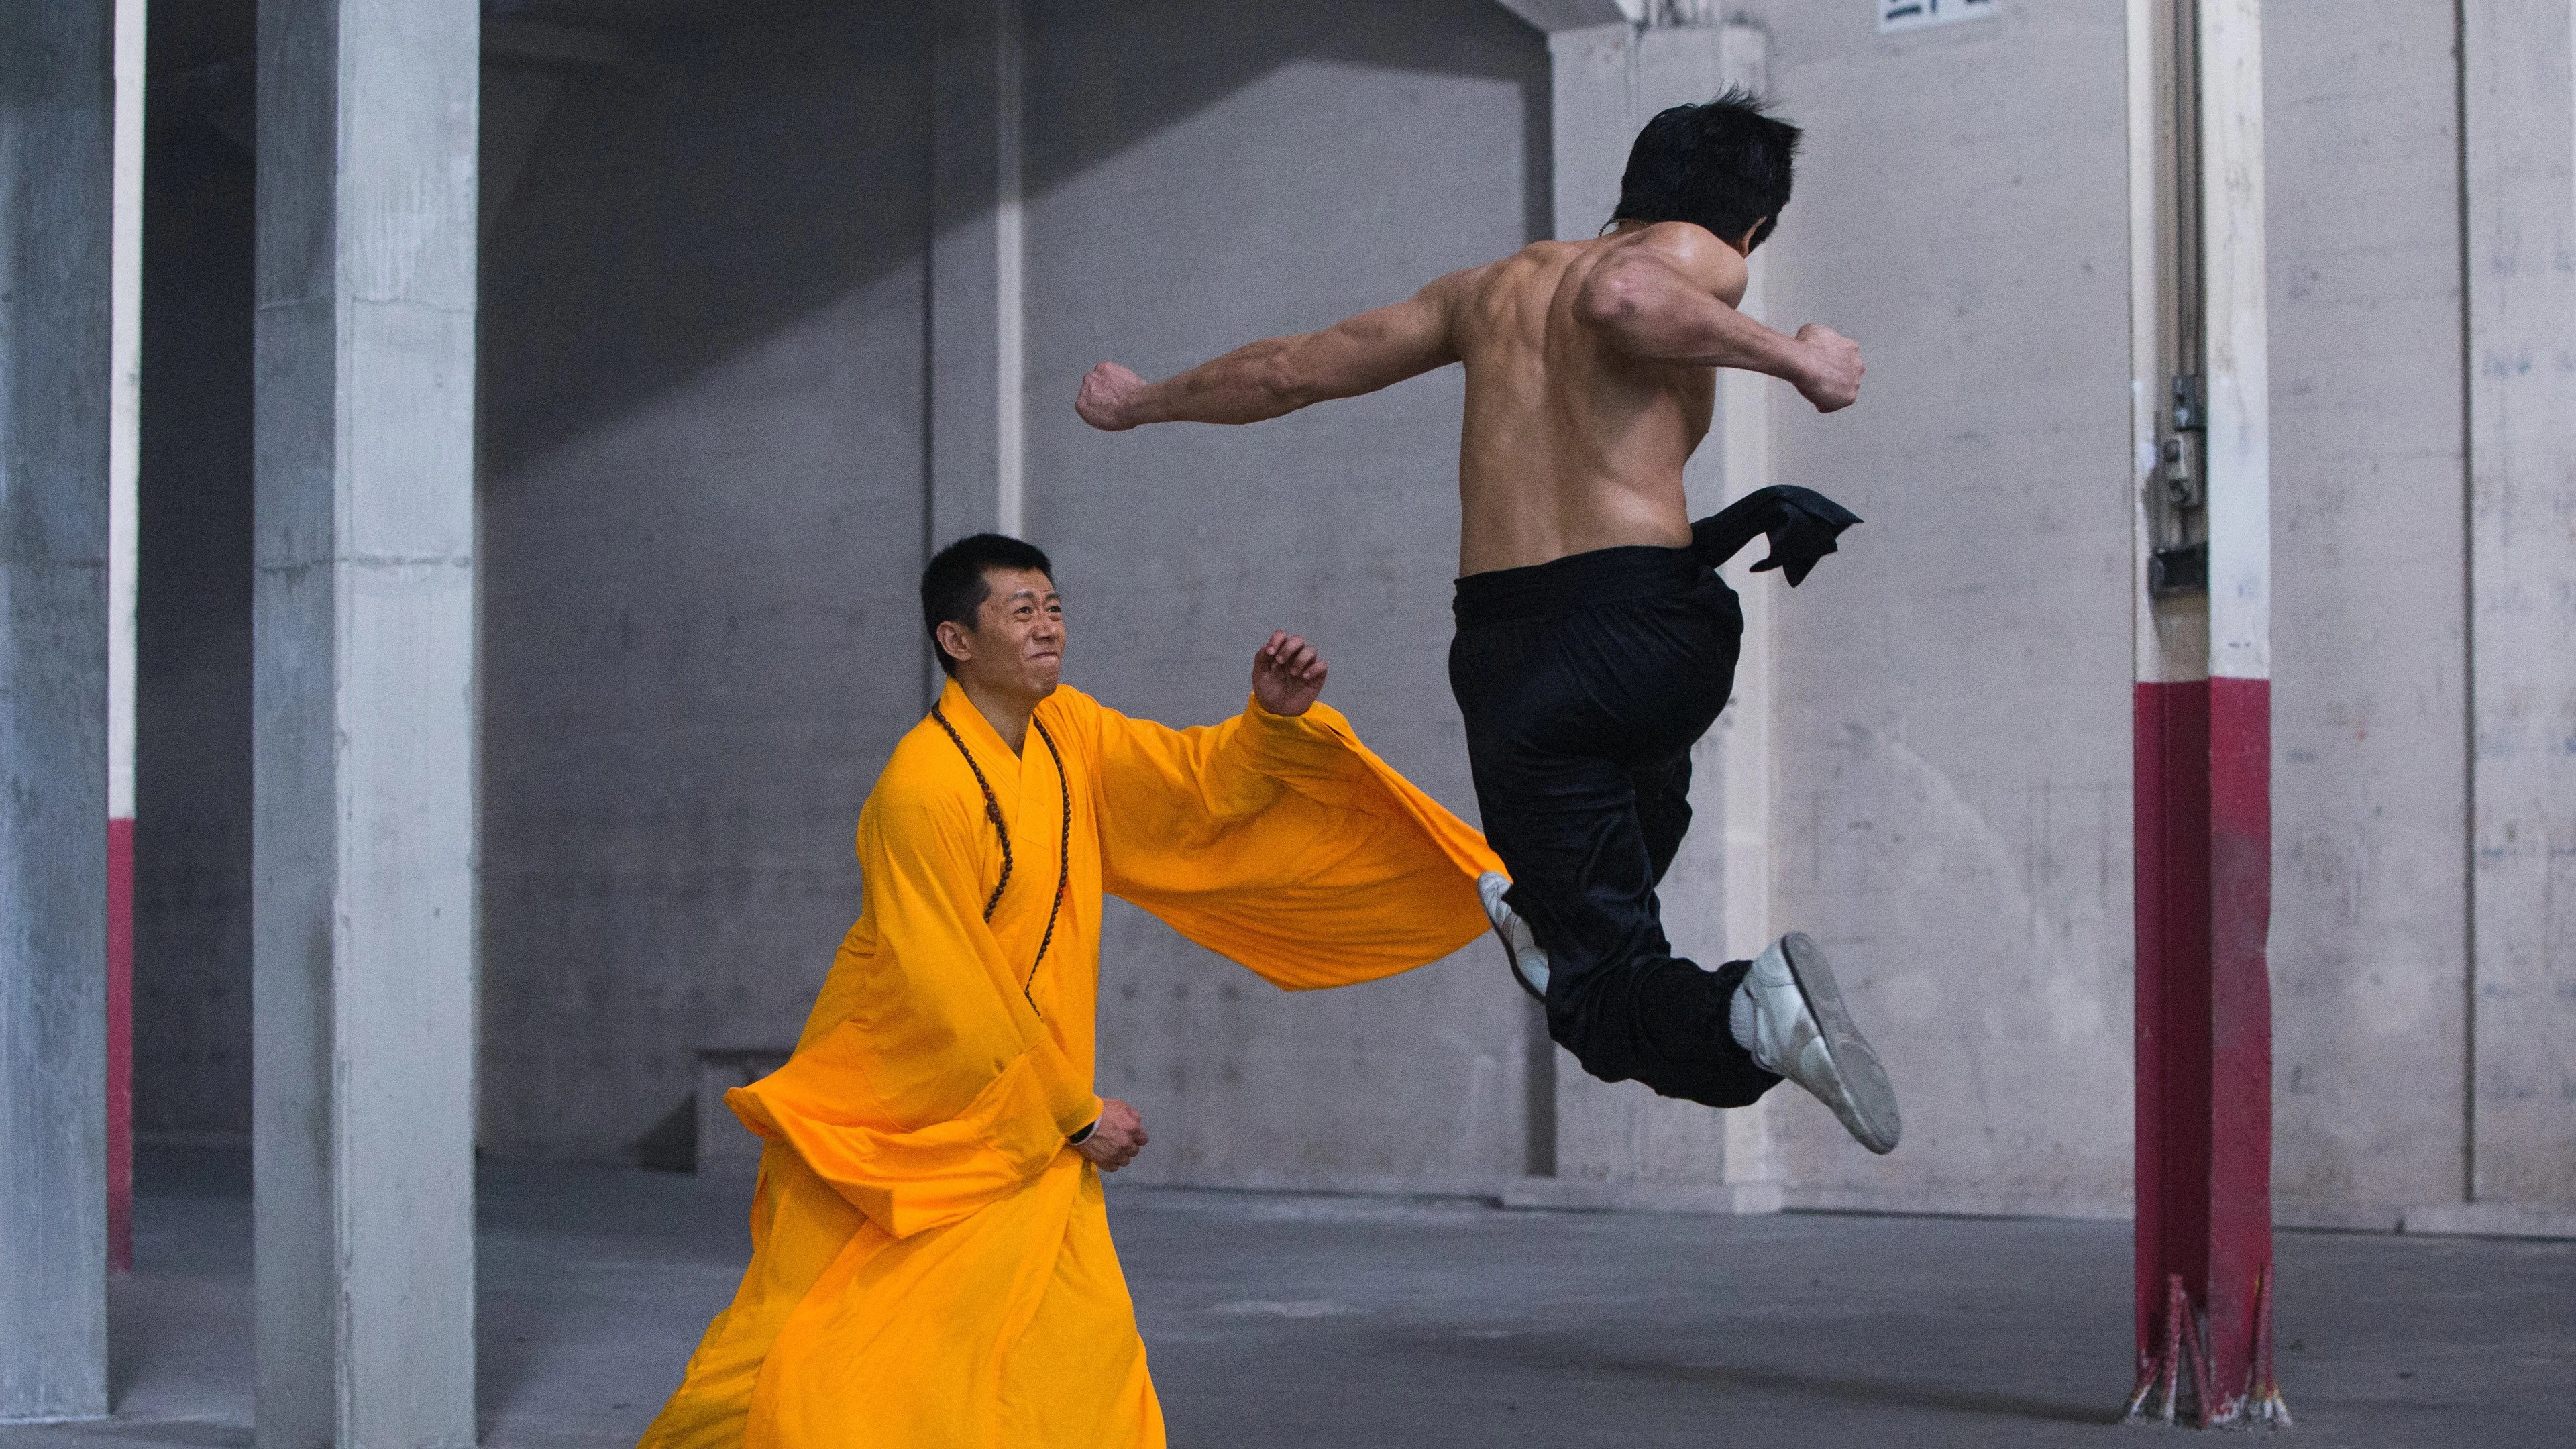 Birth of the Dragon trailer, Bruce Lee's legacy, Legendary martial artist, Rising to greatness, 3840x2160 4K Desktop